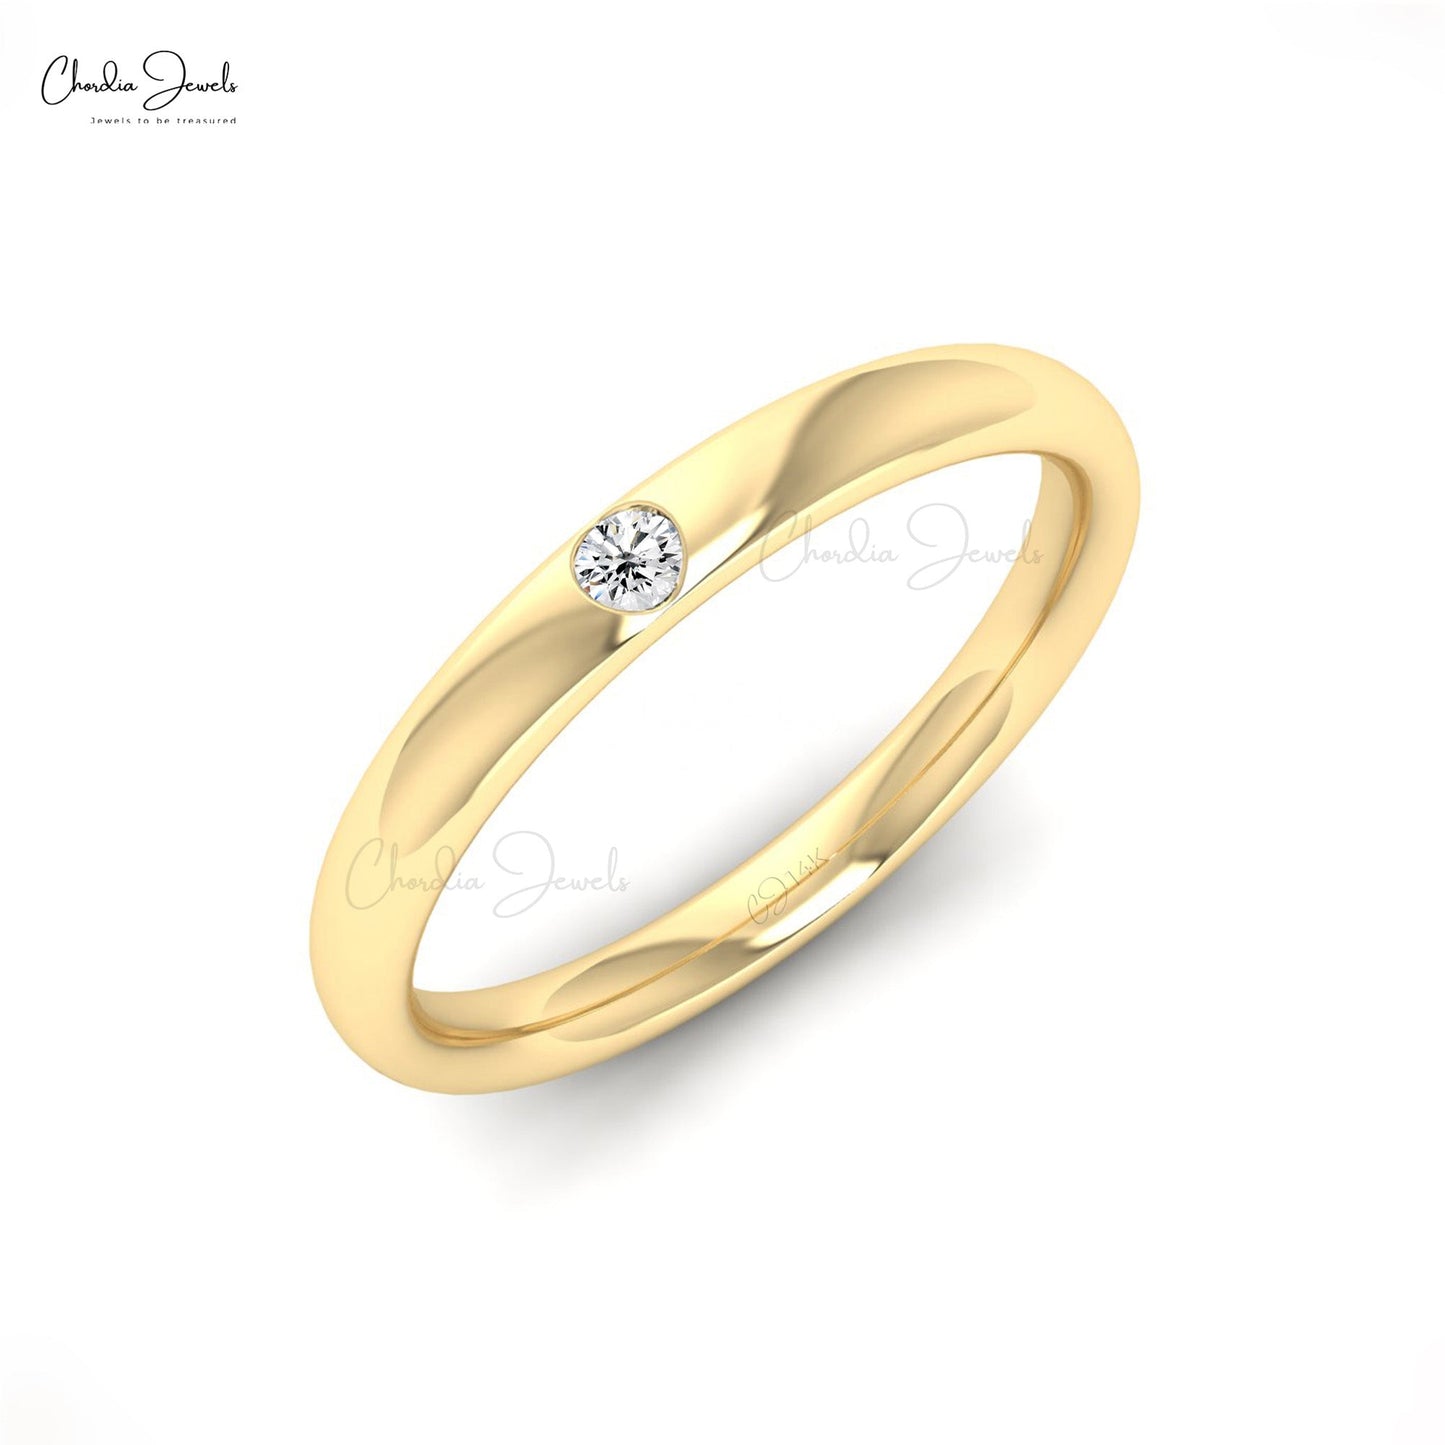 Buy the Best Gold Layered Rings That Suit Your Style – Parakkat Jewels